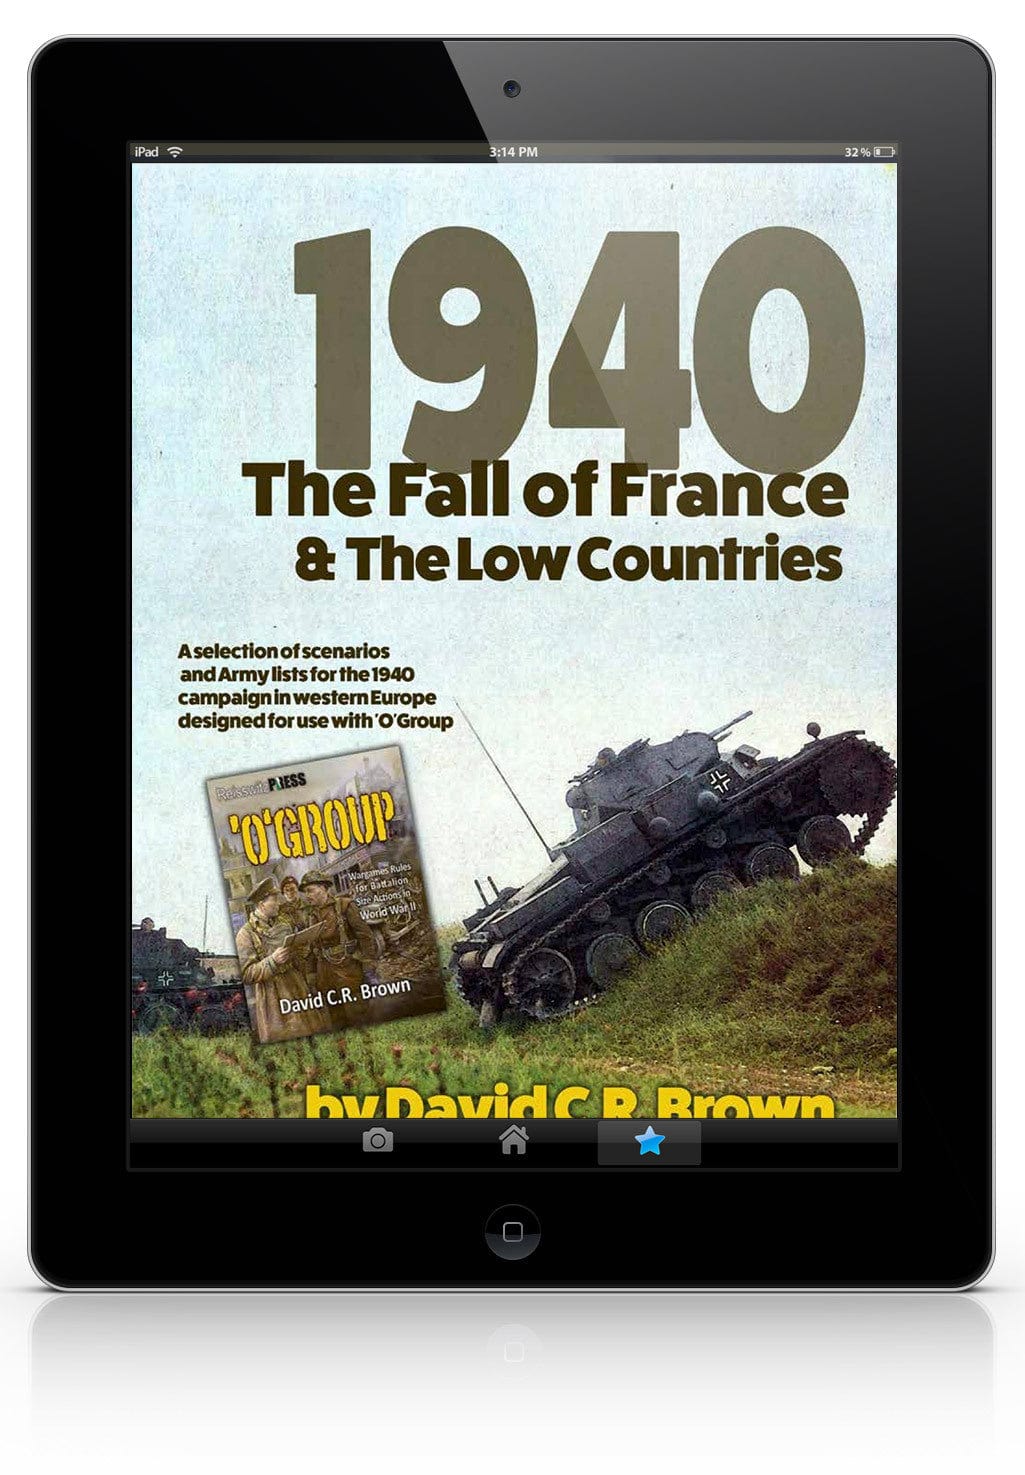 1940 The Fall of France & The Low Countries for O Group-TooFatLardies